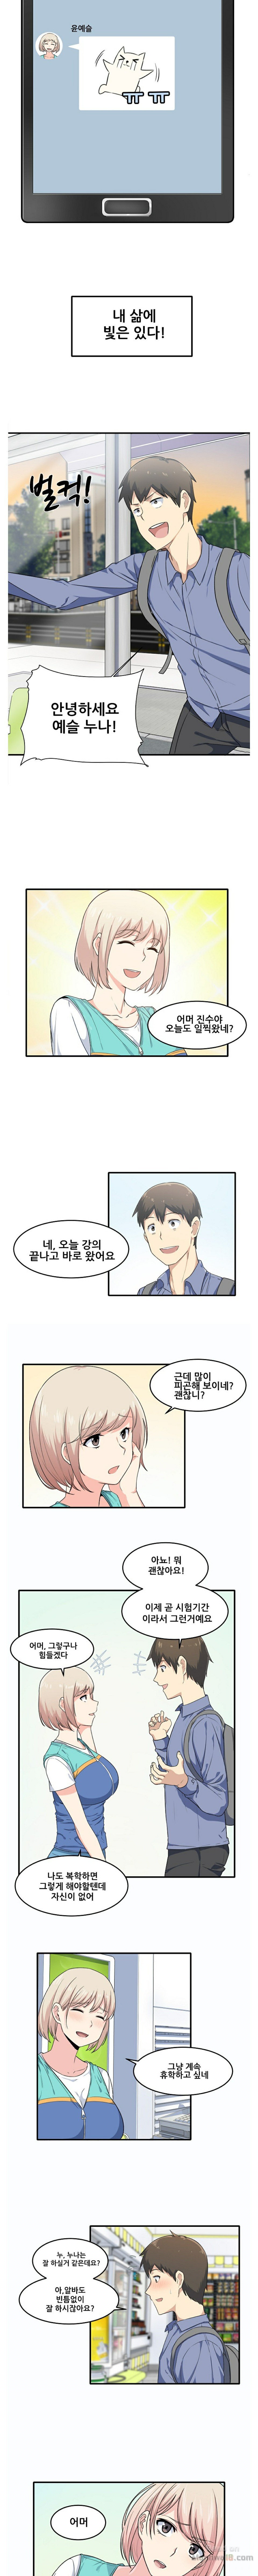 the-ark-is-me-raw-chap-3-7